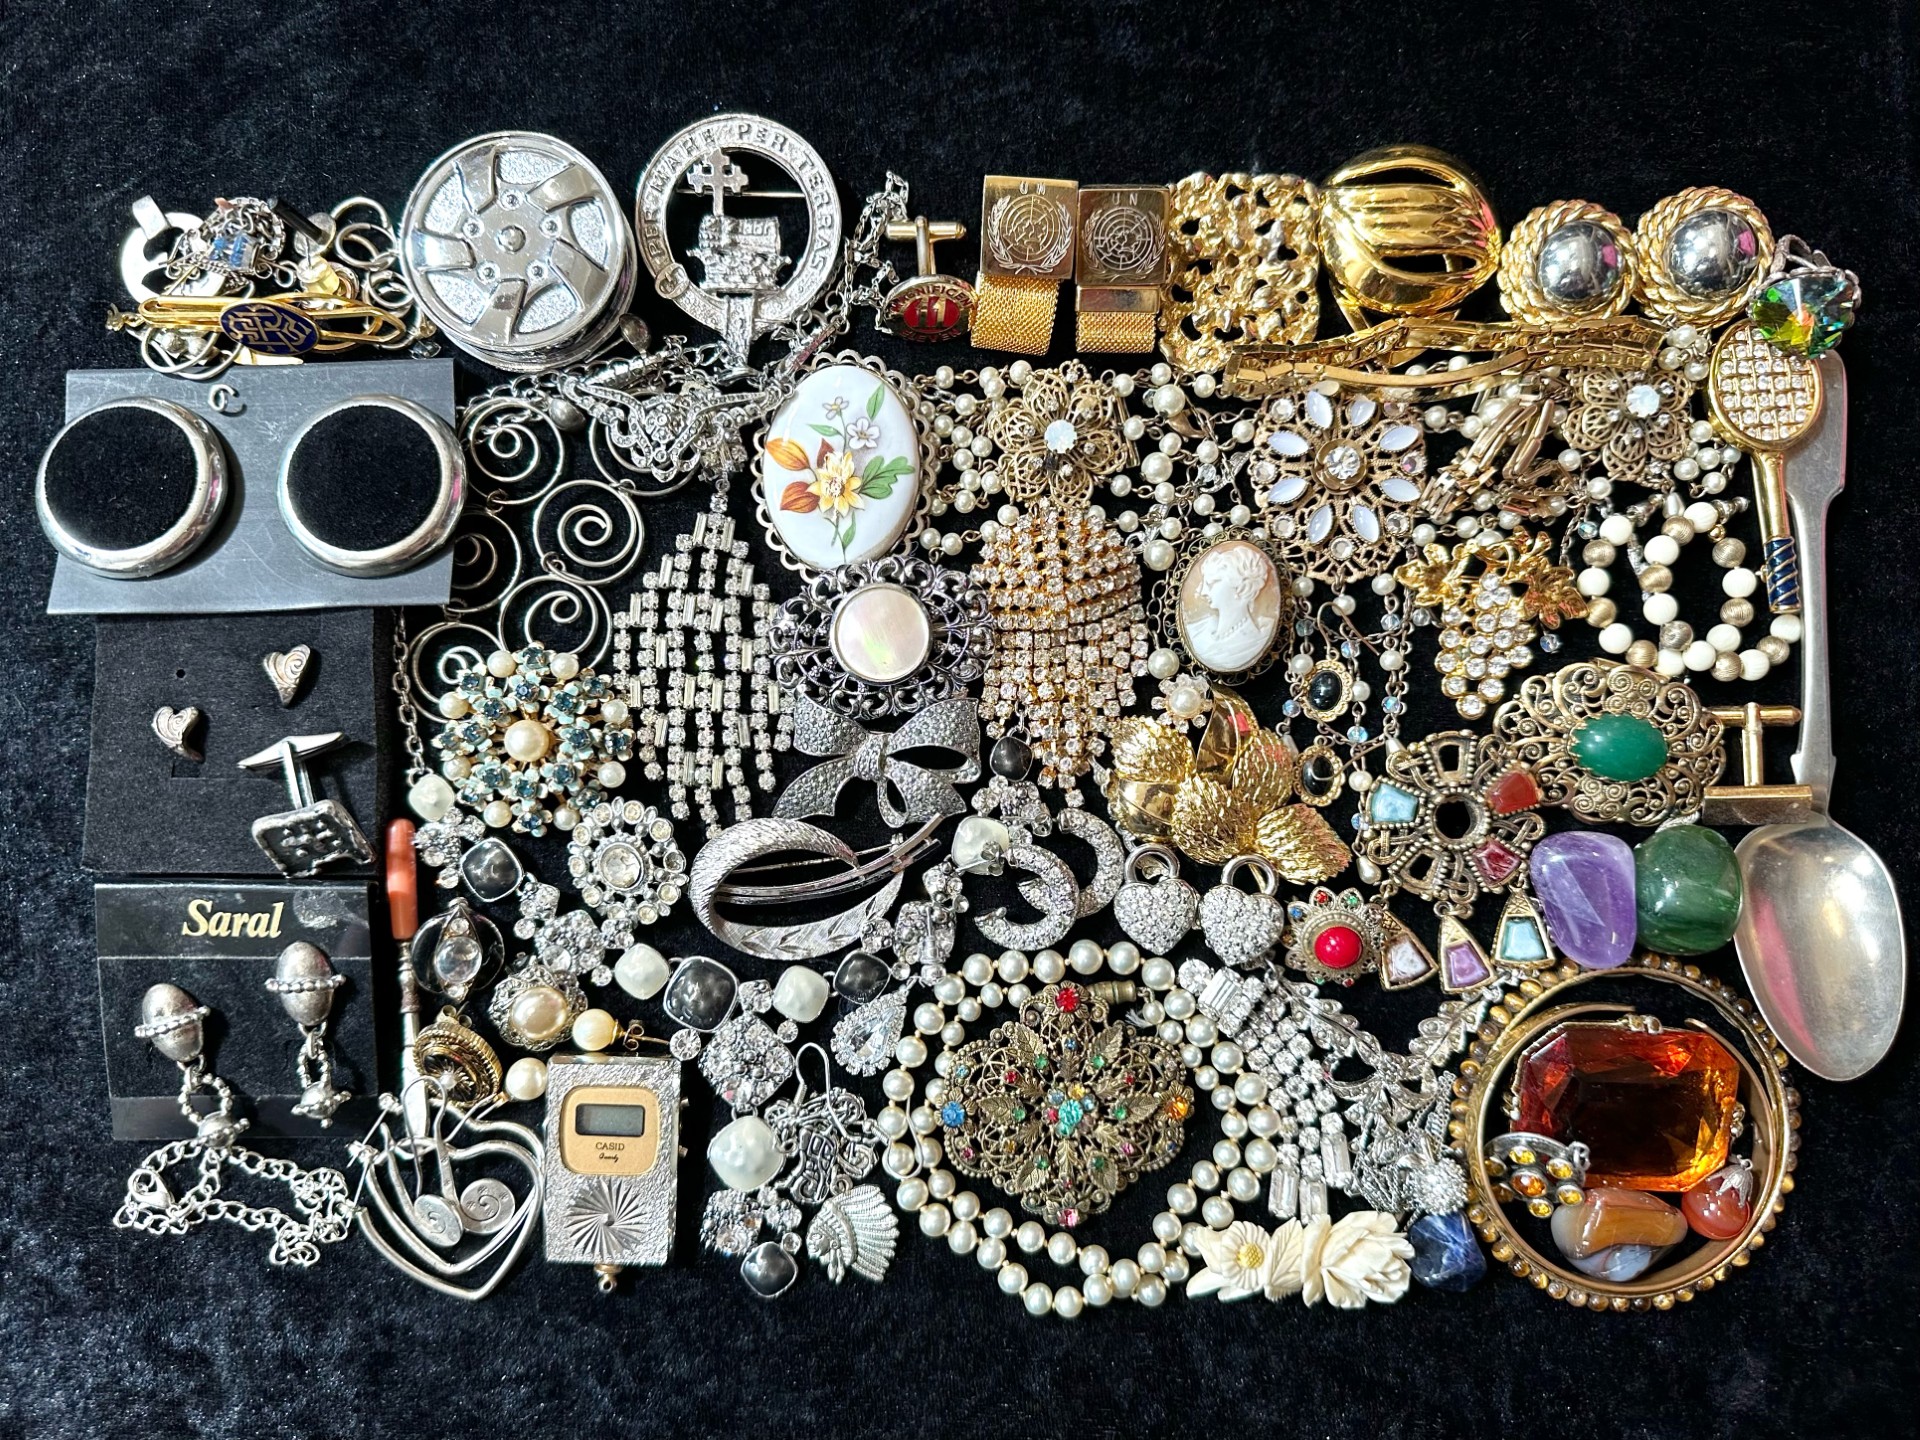 Collection Of Costume Jewellery - To Include Brooches, Earrings, Necklaces Stones, A Spoon Etc...